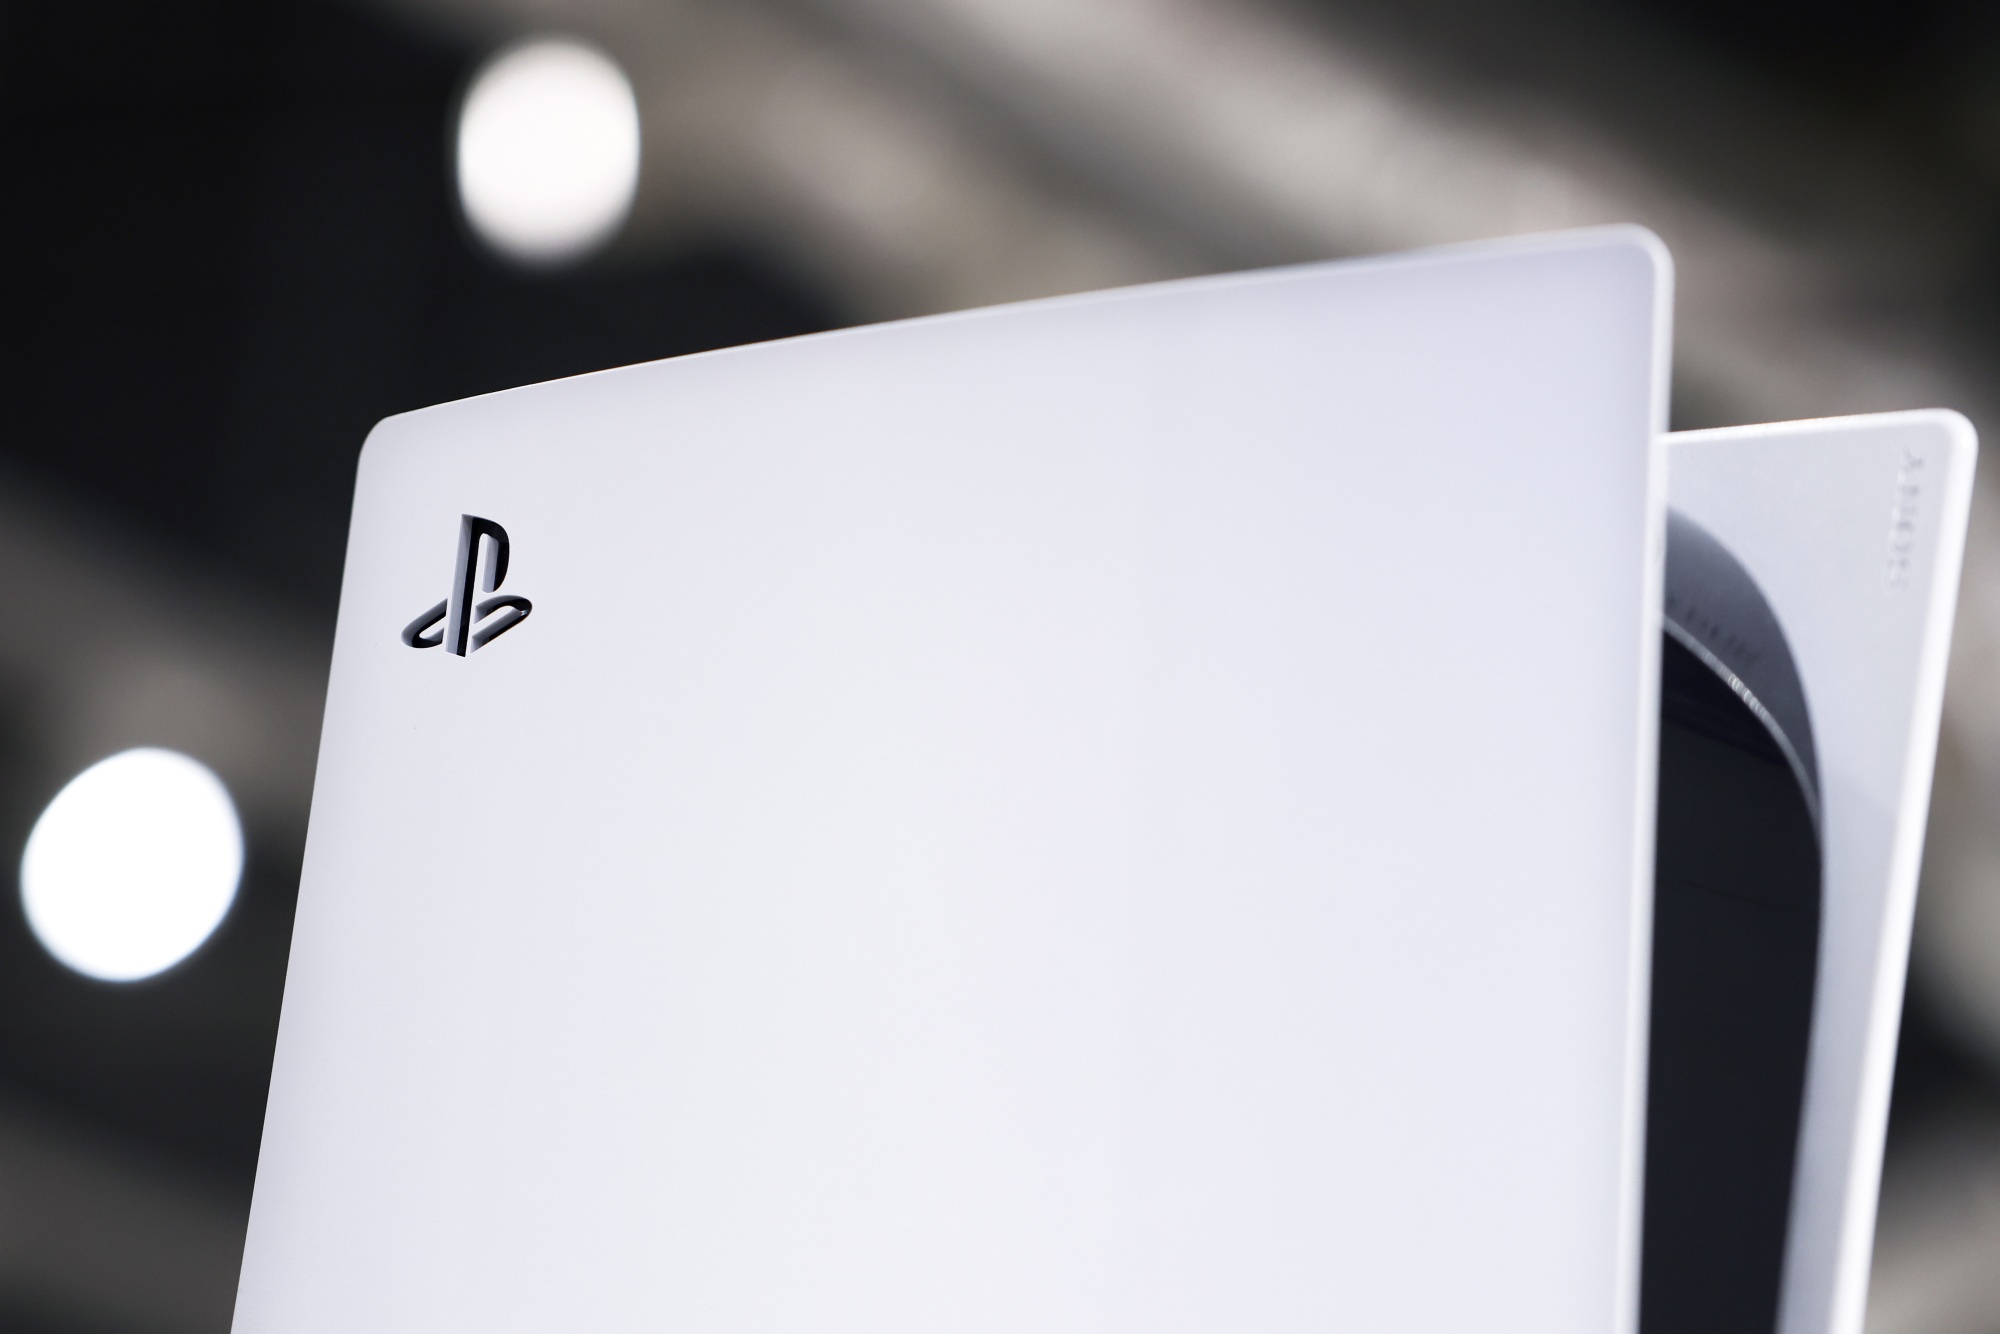 PS5 Owners Say They're Receiving Bans After Selling PS4 Users